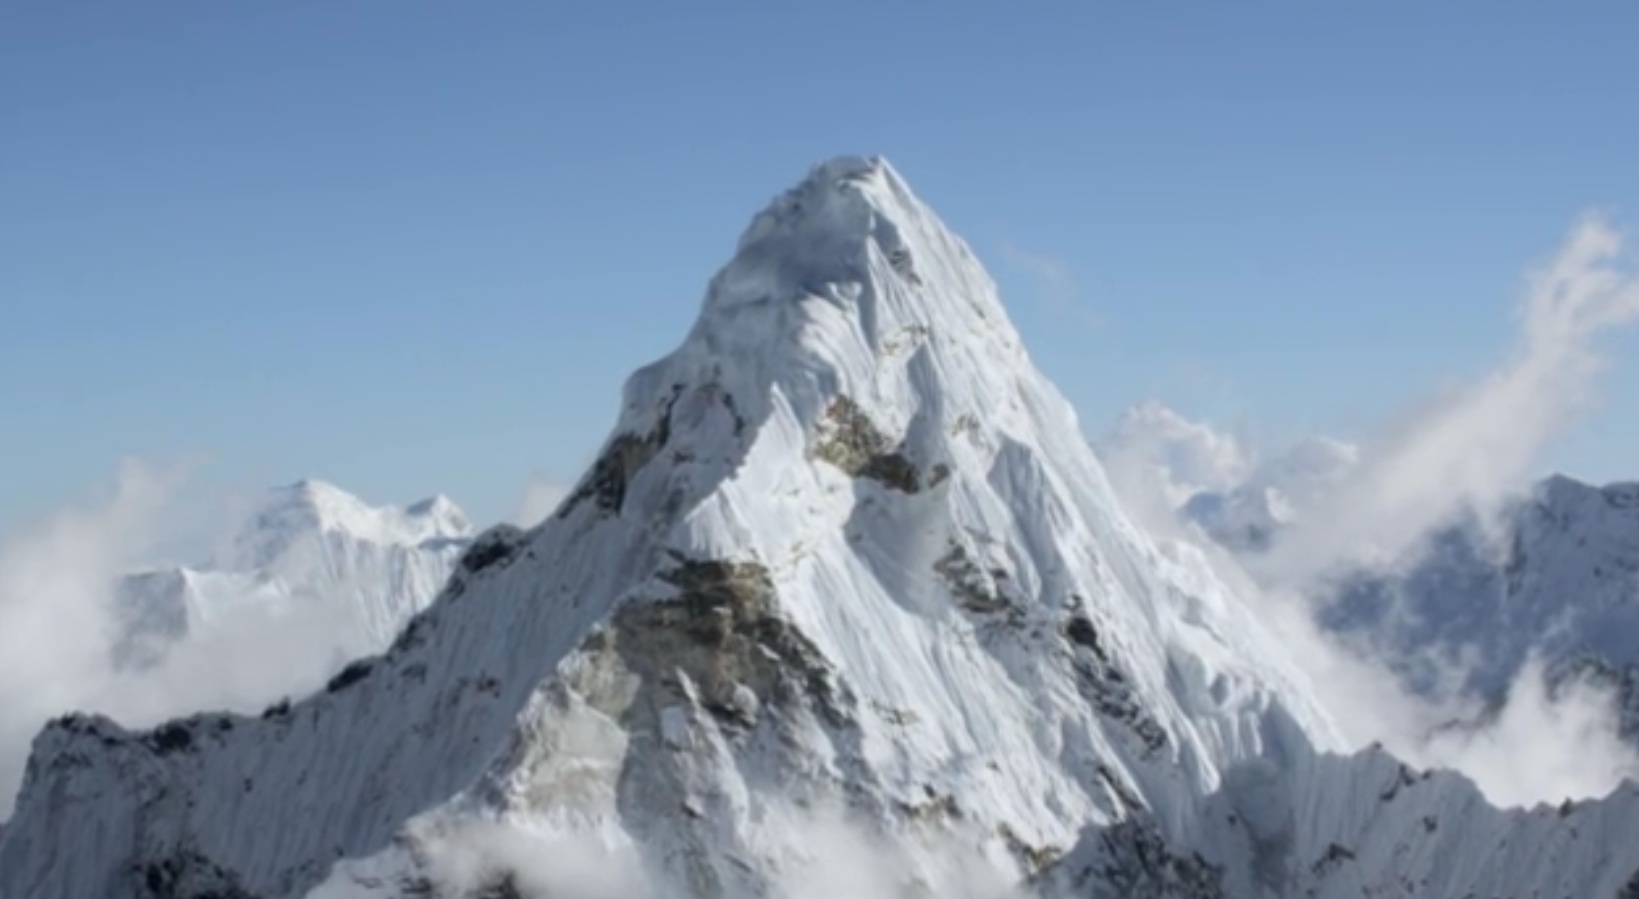 WATCH: Jaw-dropping HD footage of the Himalayas from 6,000 meters in the sky